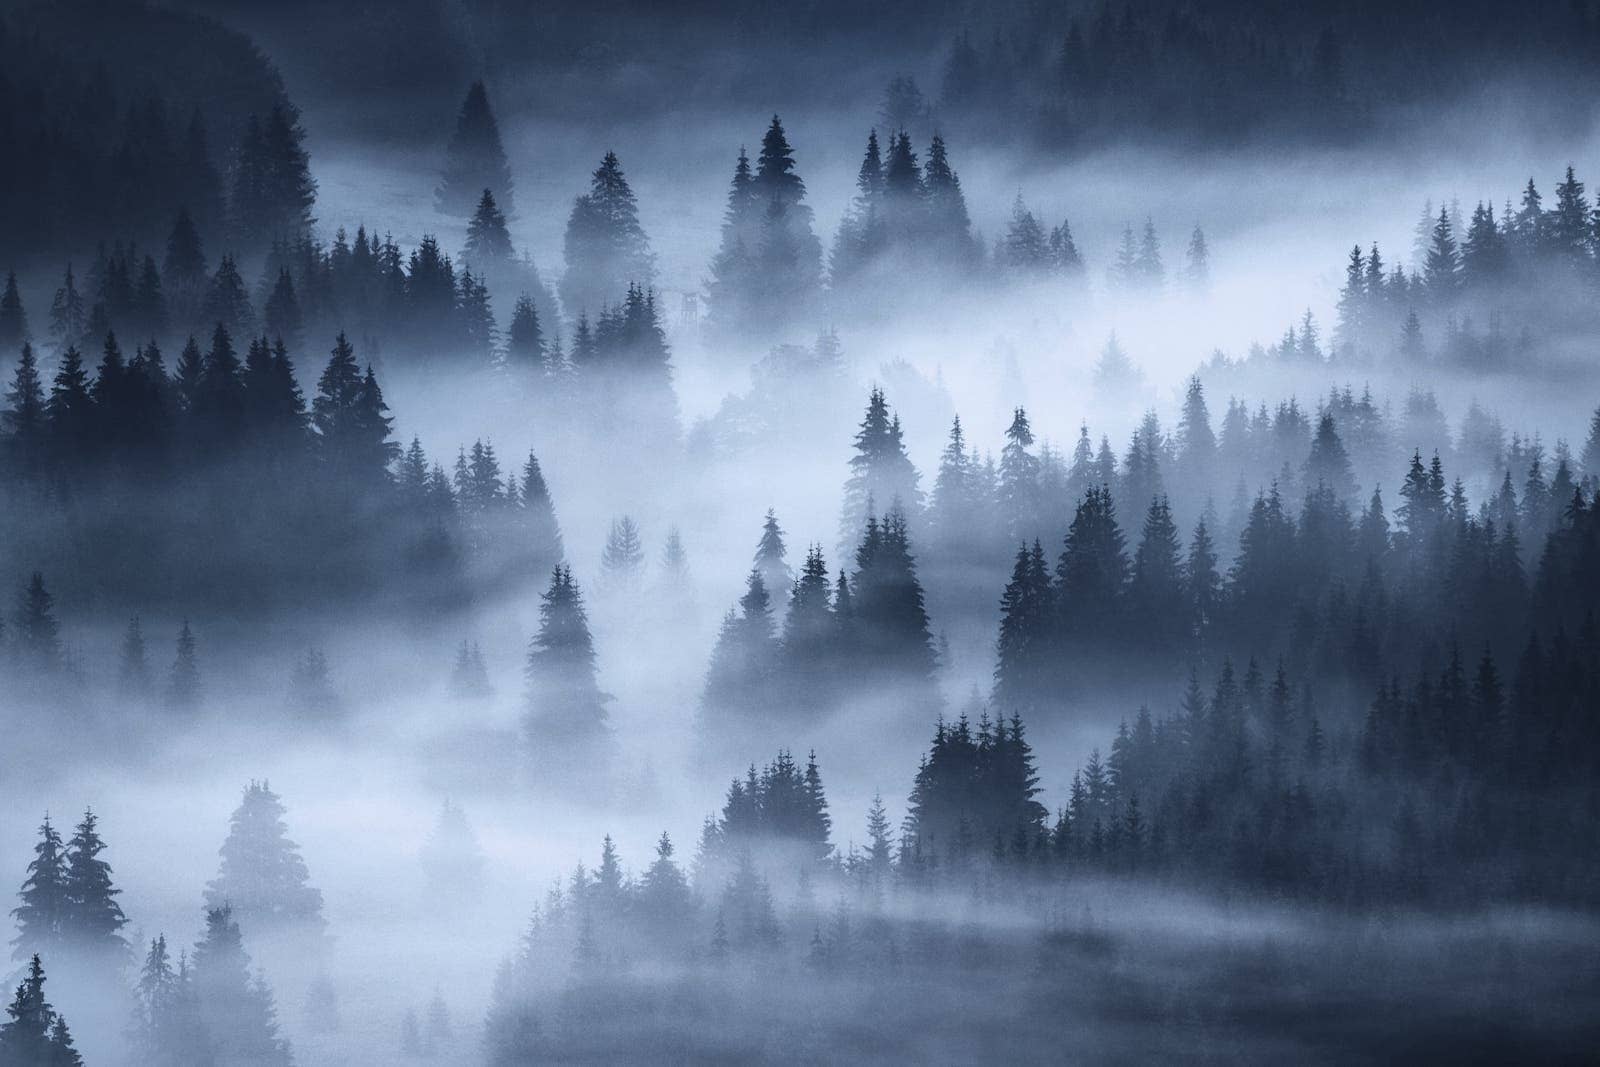 A dark forest is covered in fog - Woods